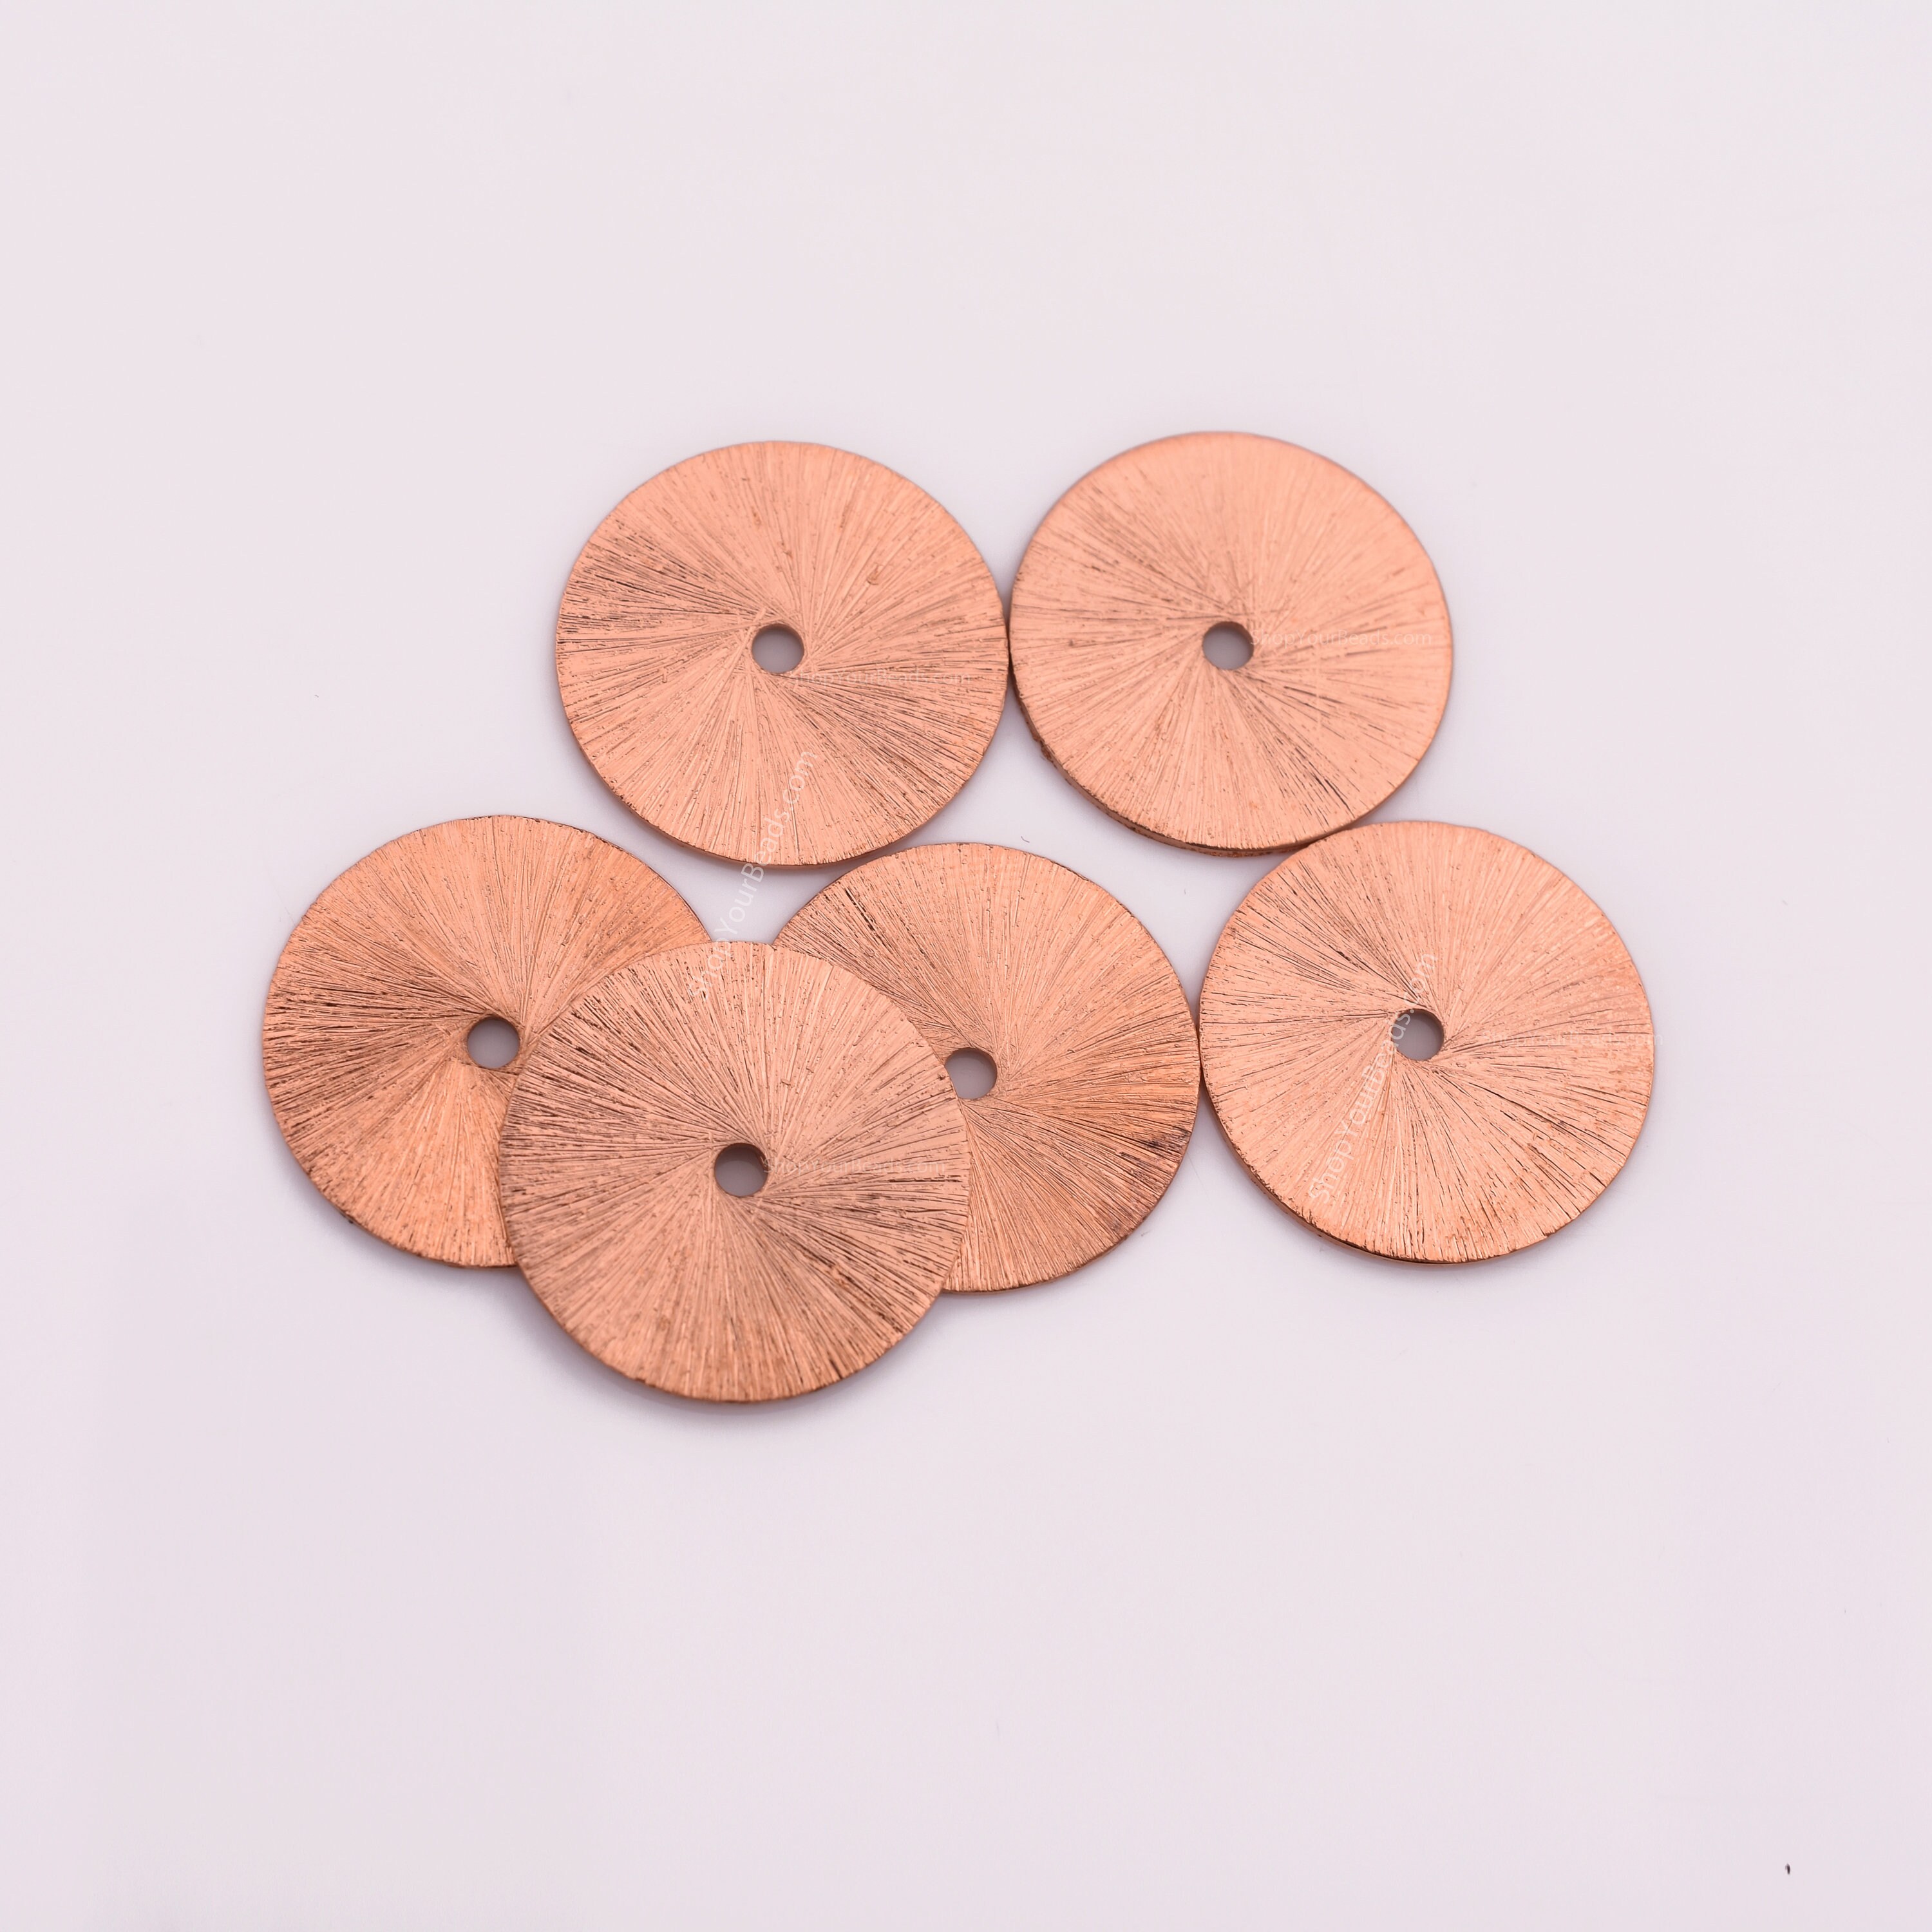 Copper Beads 8mm - 38pcs Flat copper disc spacers, brushed finish shiny  copper disk spacer beads for jewelry making, Copper Heishi Beads